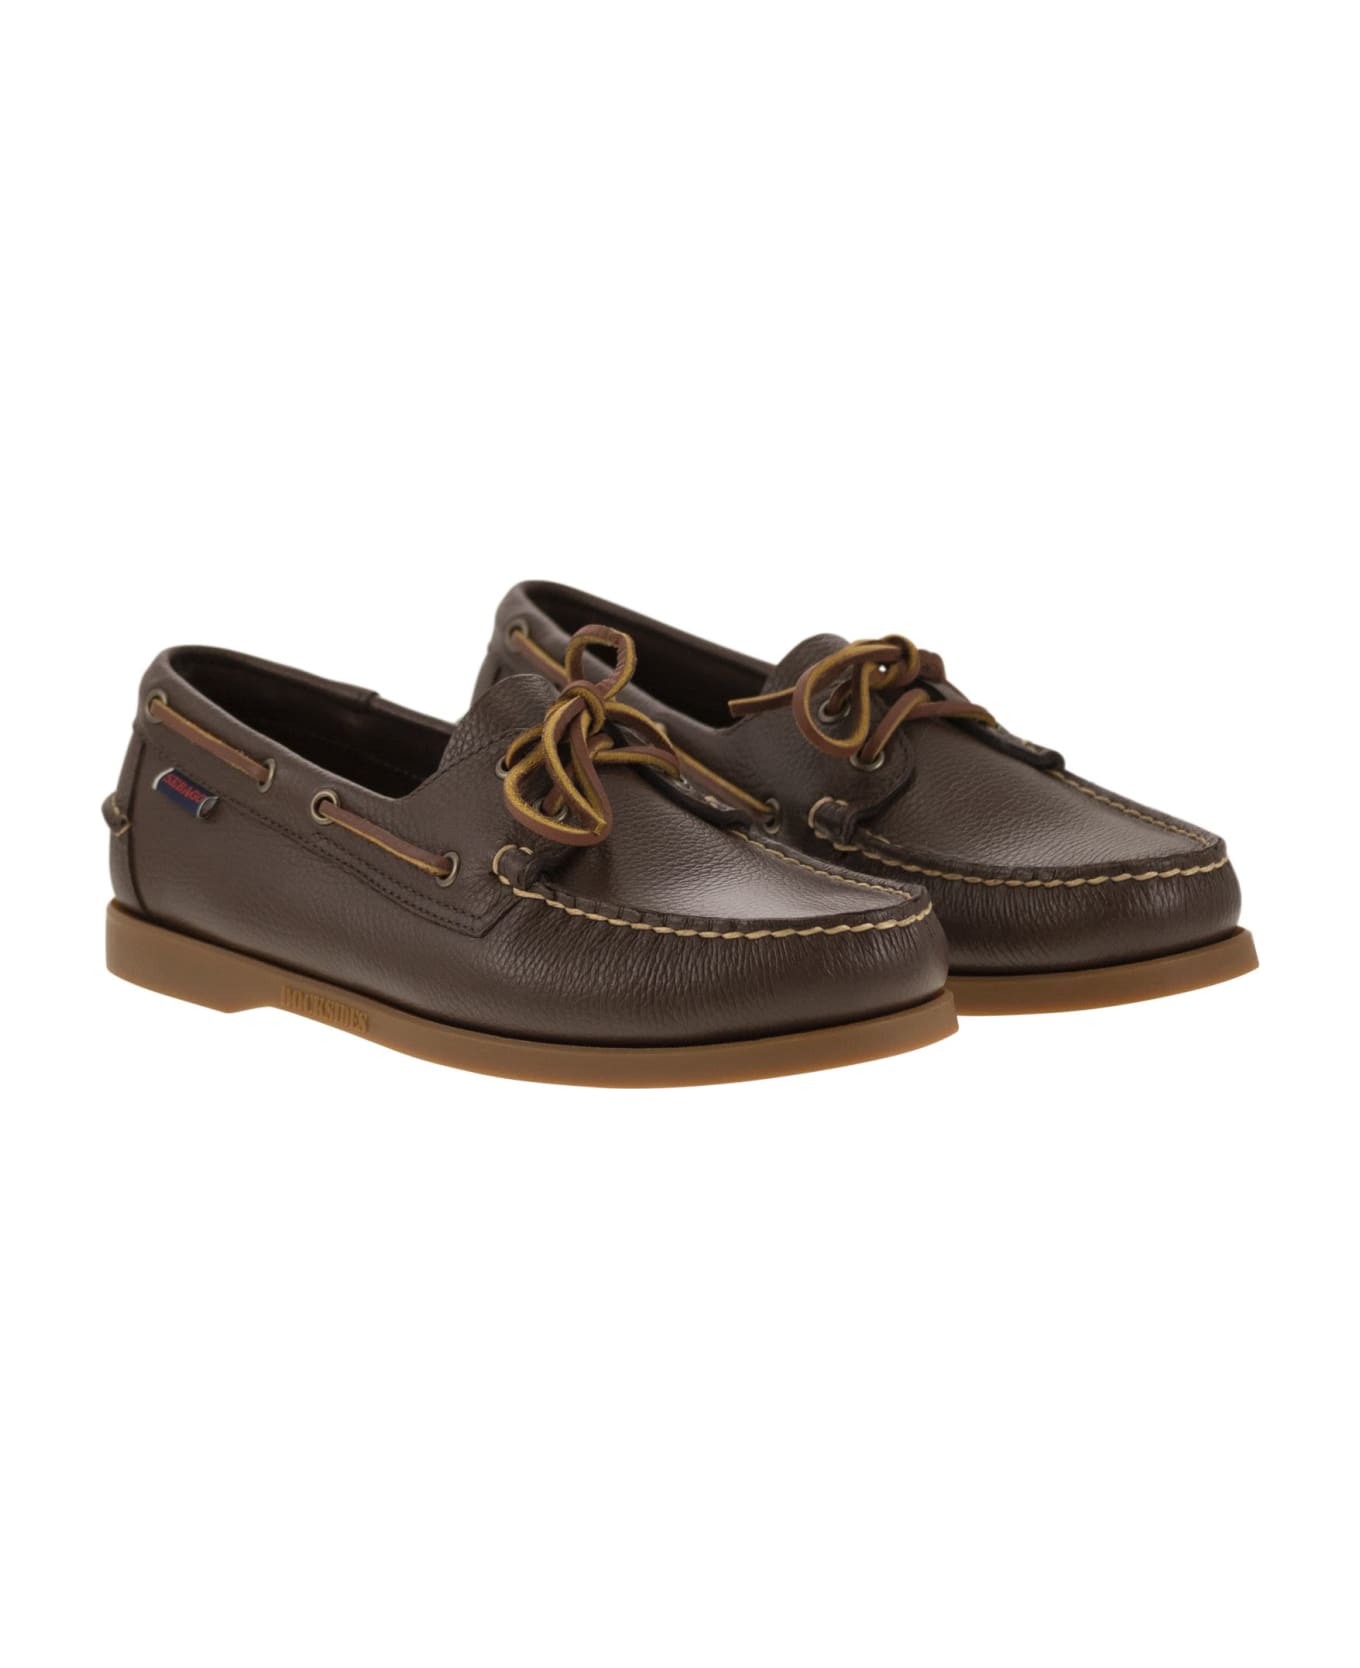 Sebago Portland - Moccasin With Grained Leather - Brown